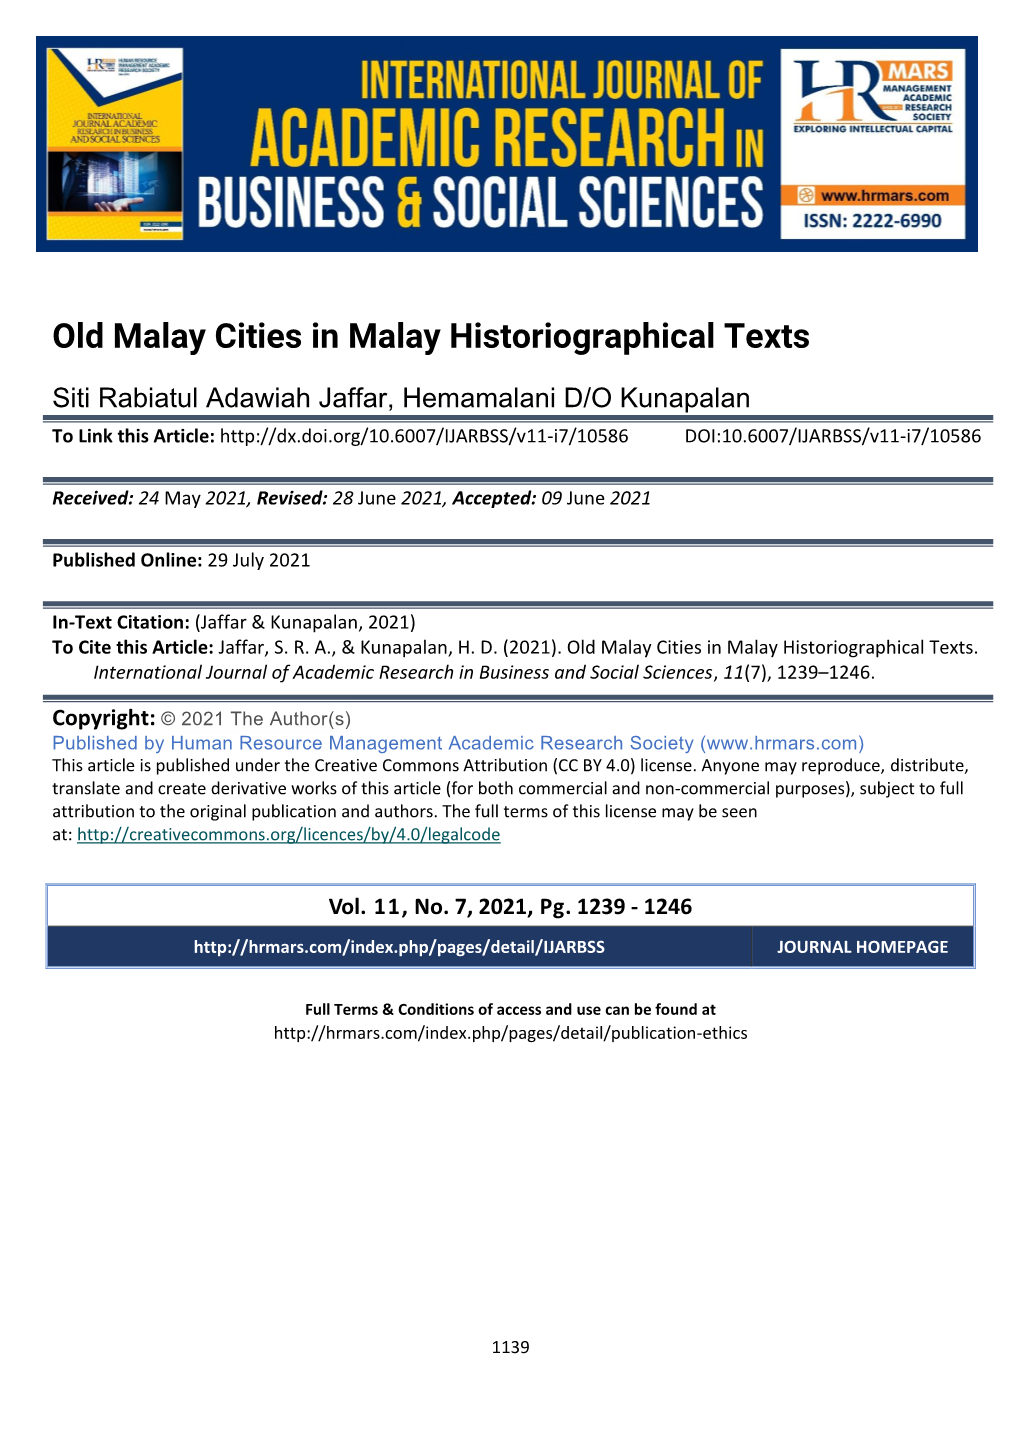 Old Malay Cities in Malay Historiographical Texts